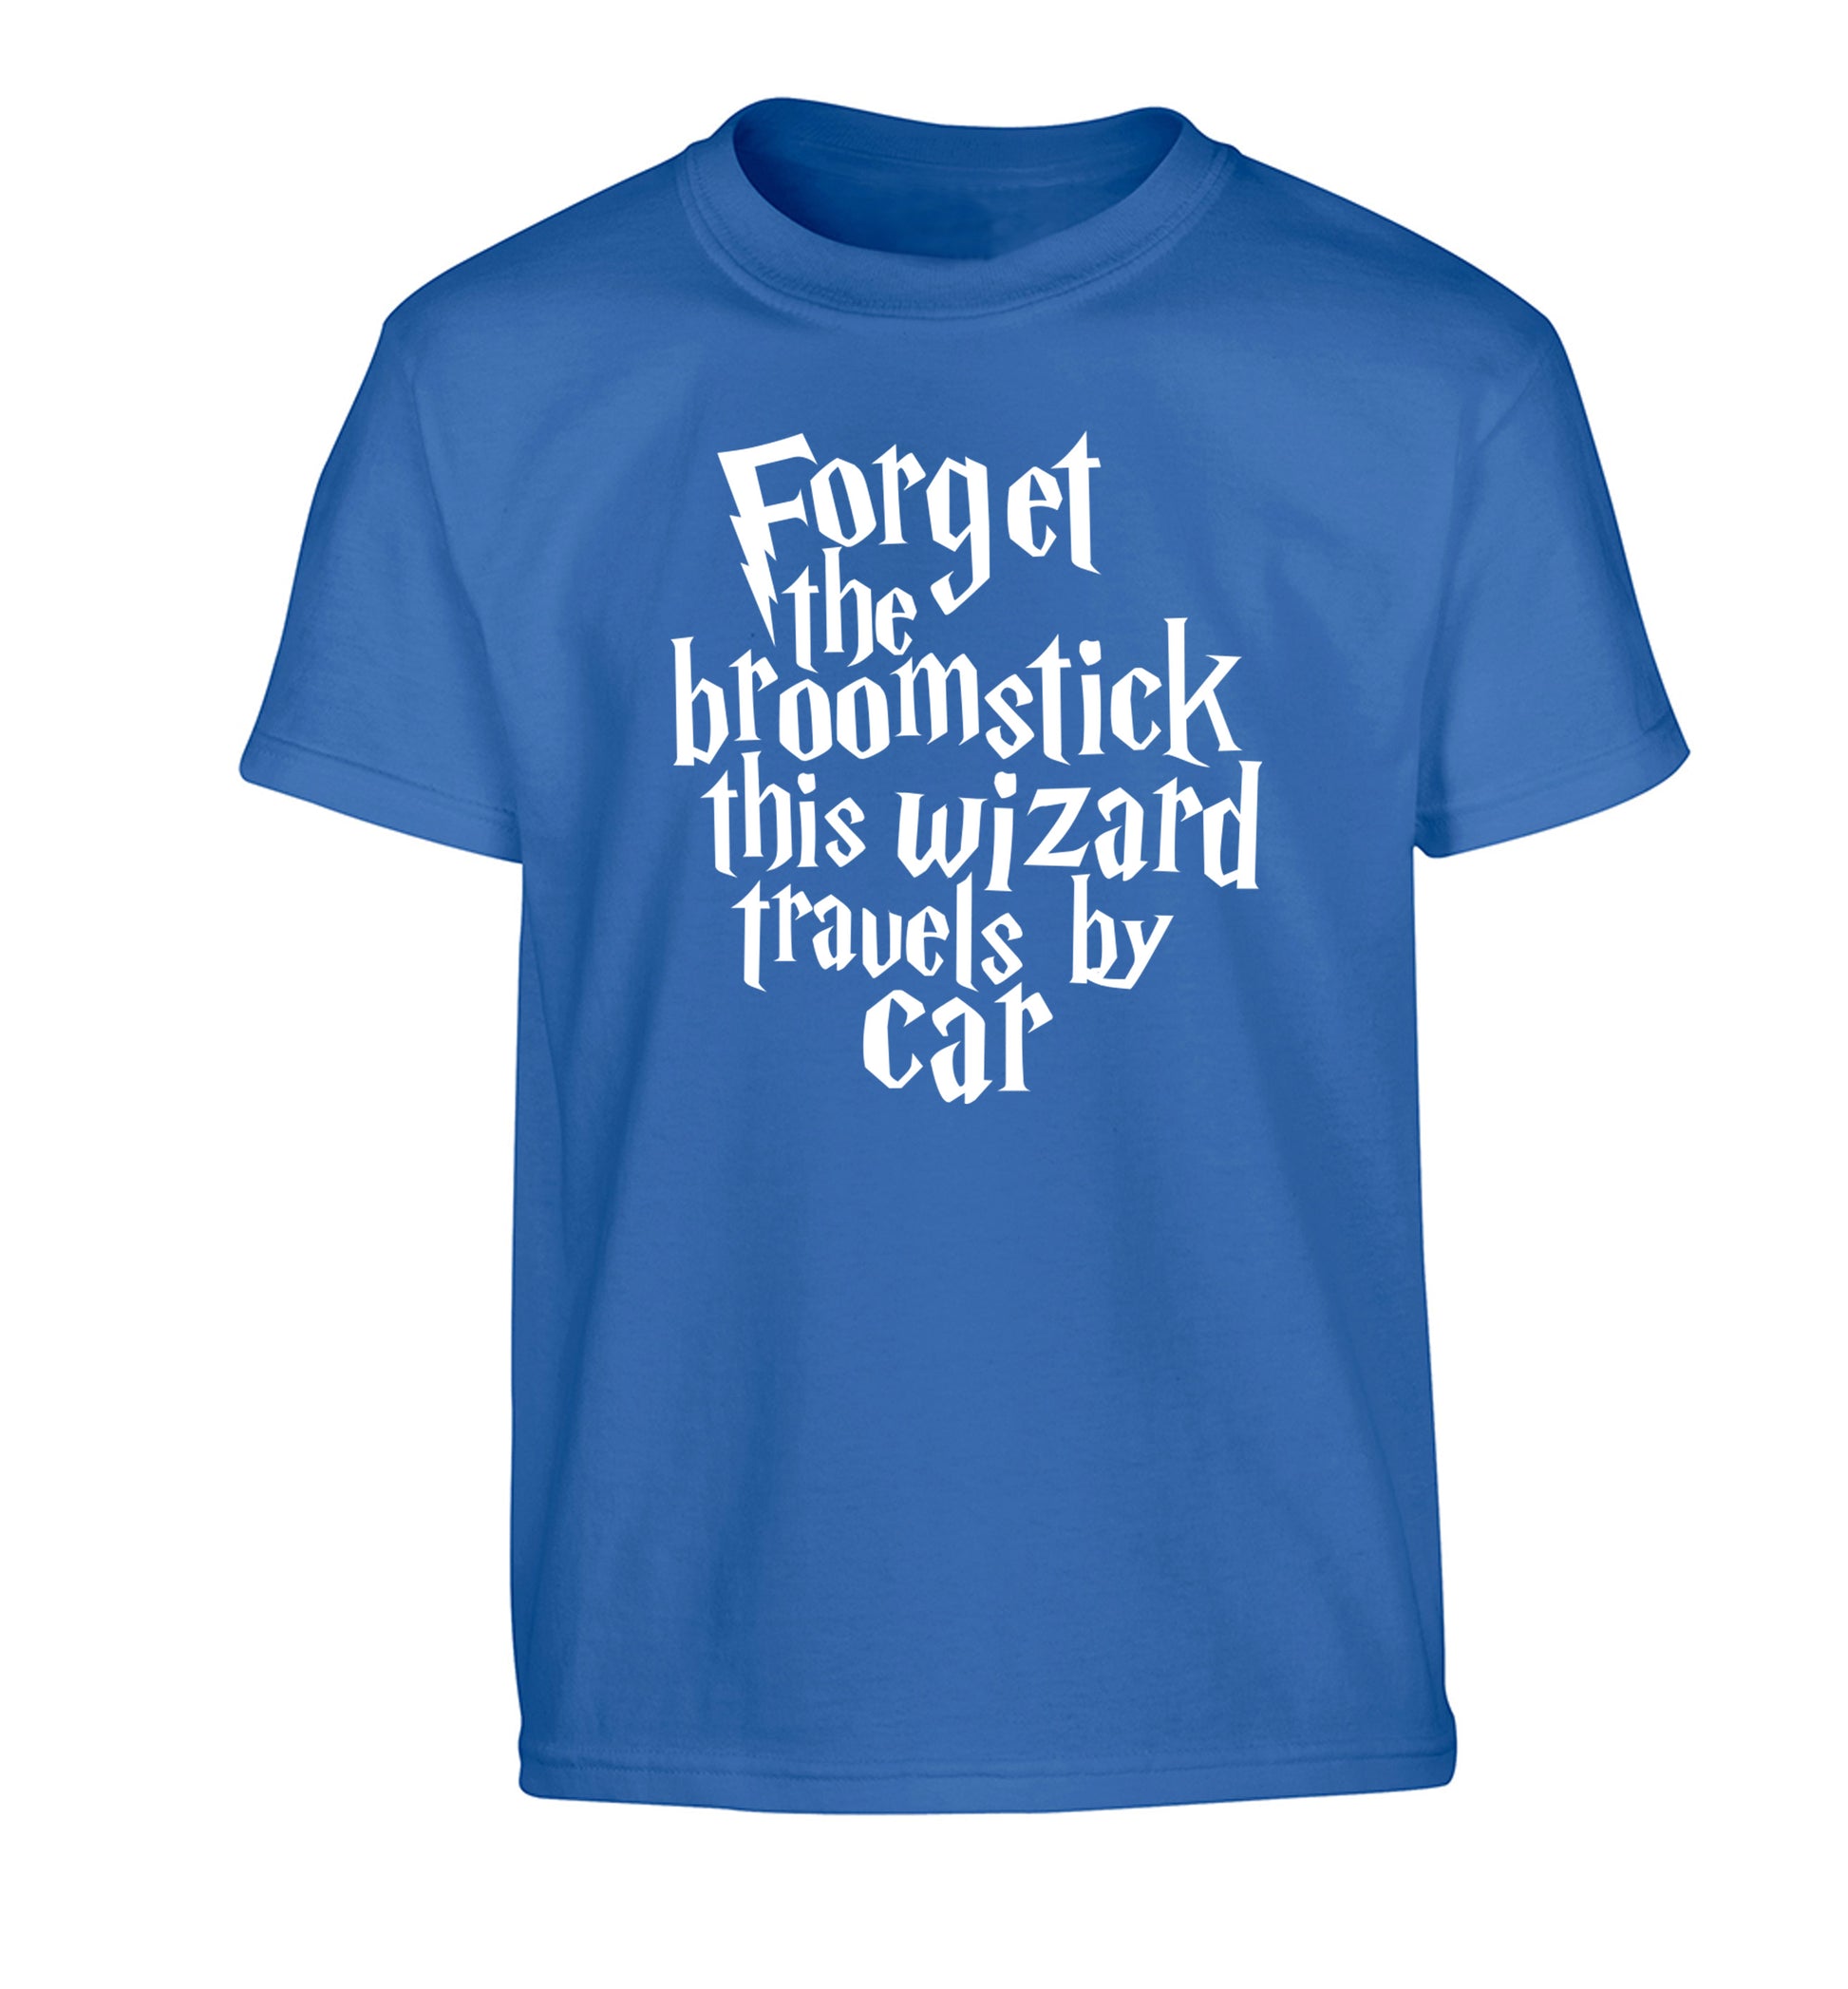 Forget the broomstick this wizard travels by car Children's blue Tshirt 12-14 Years